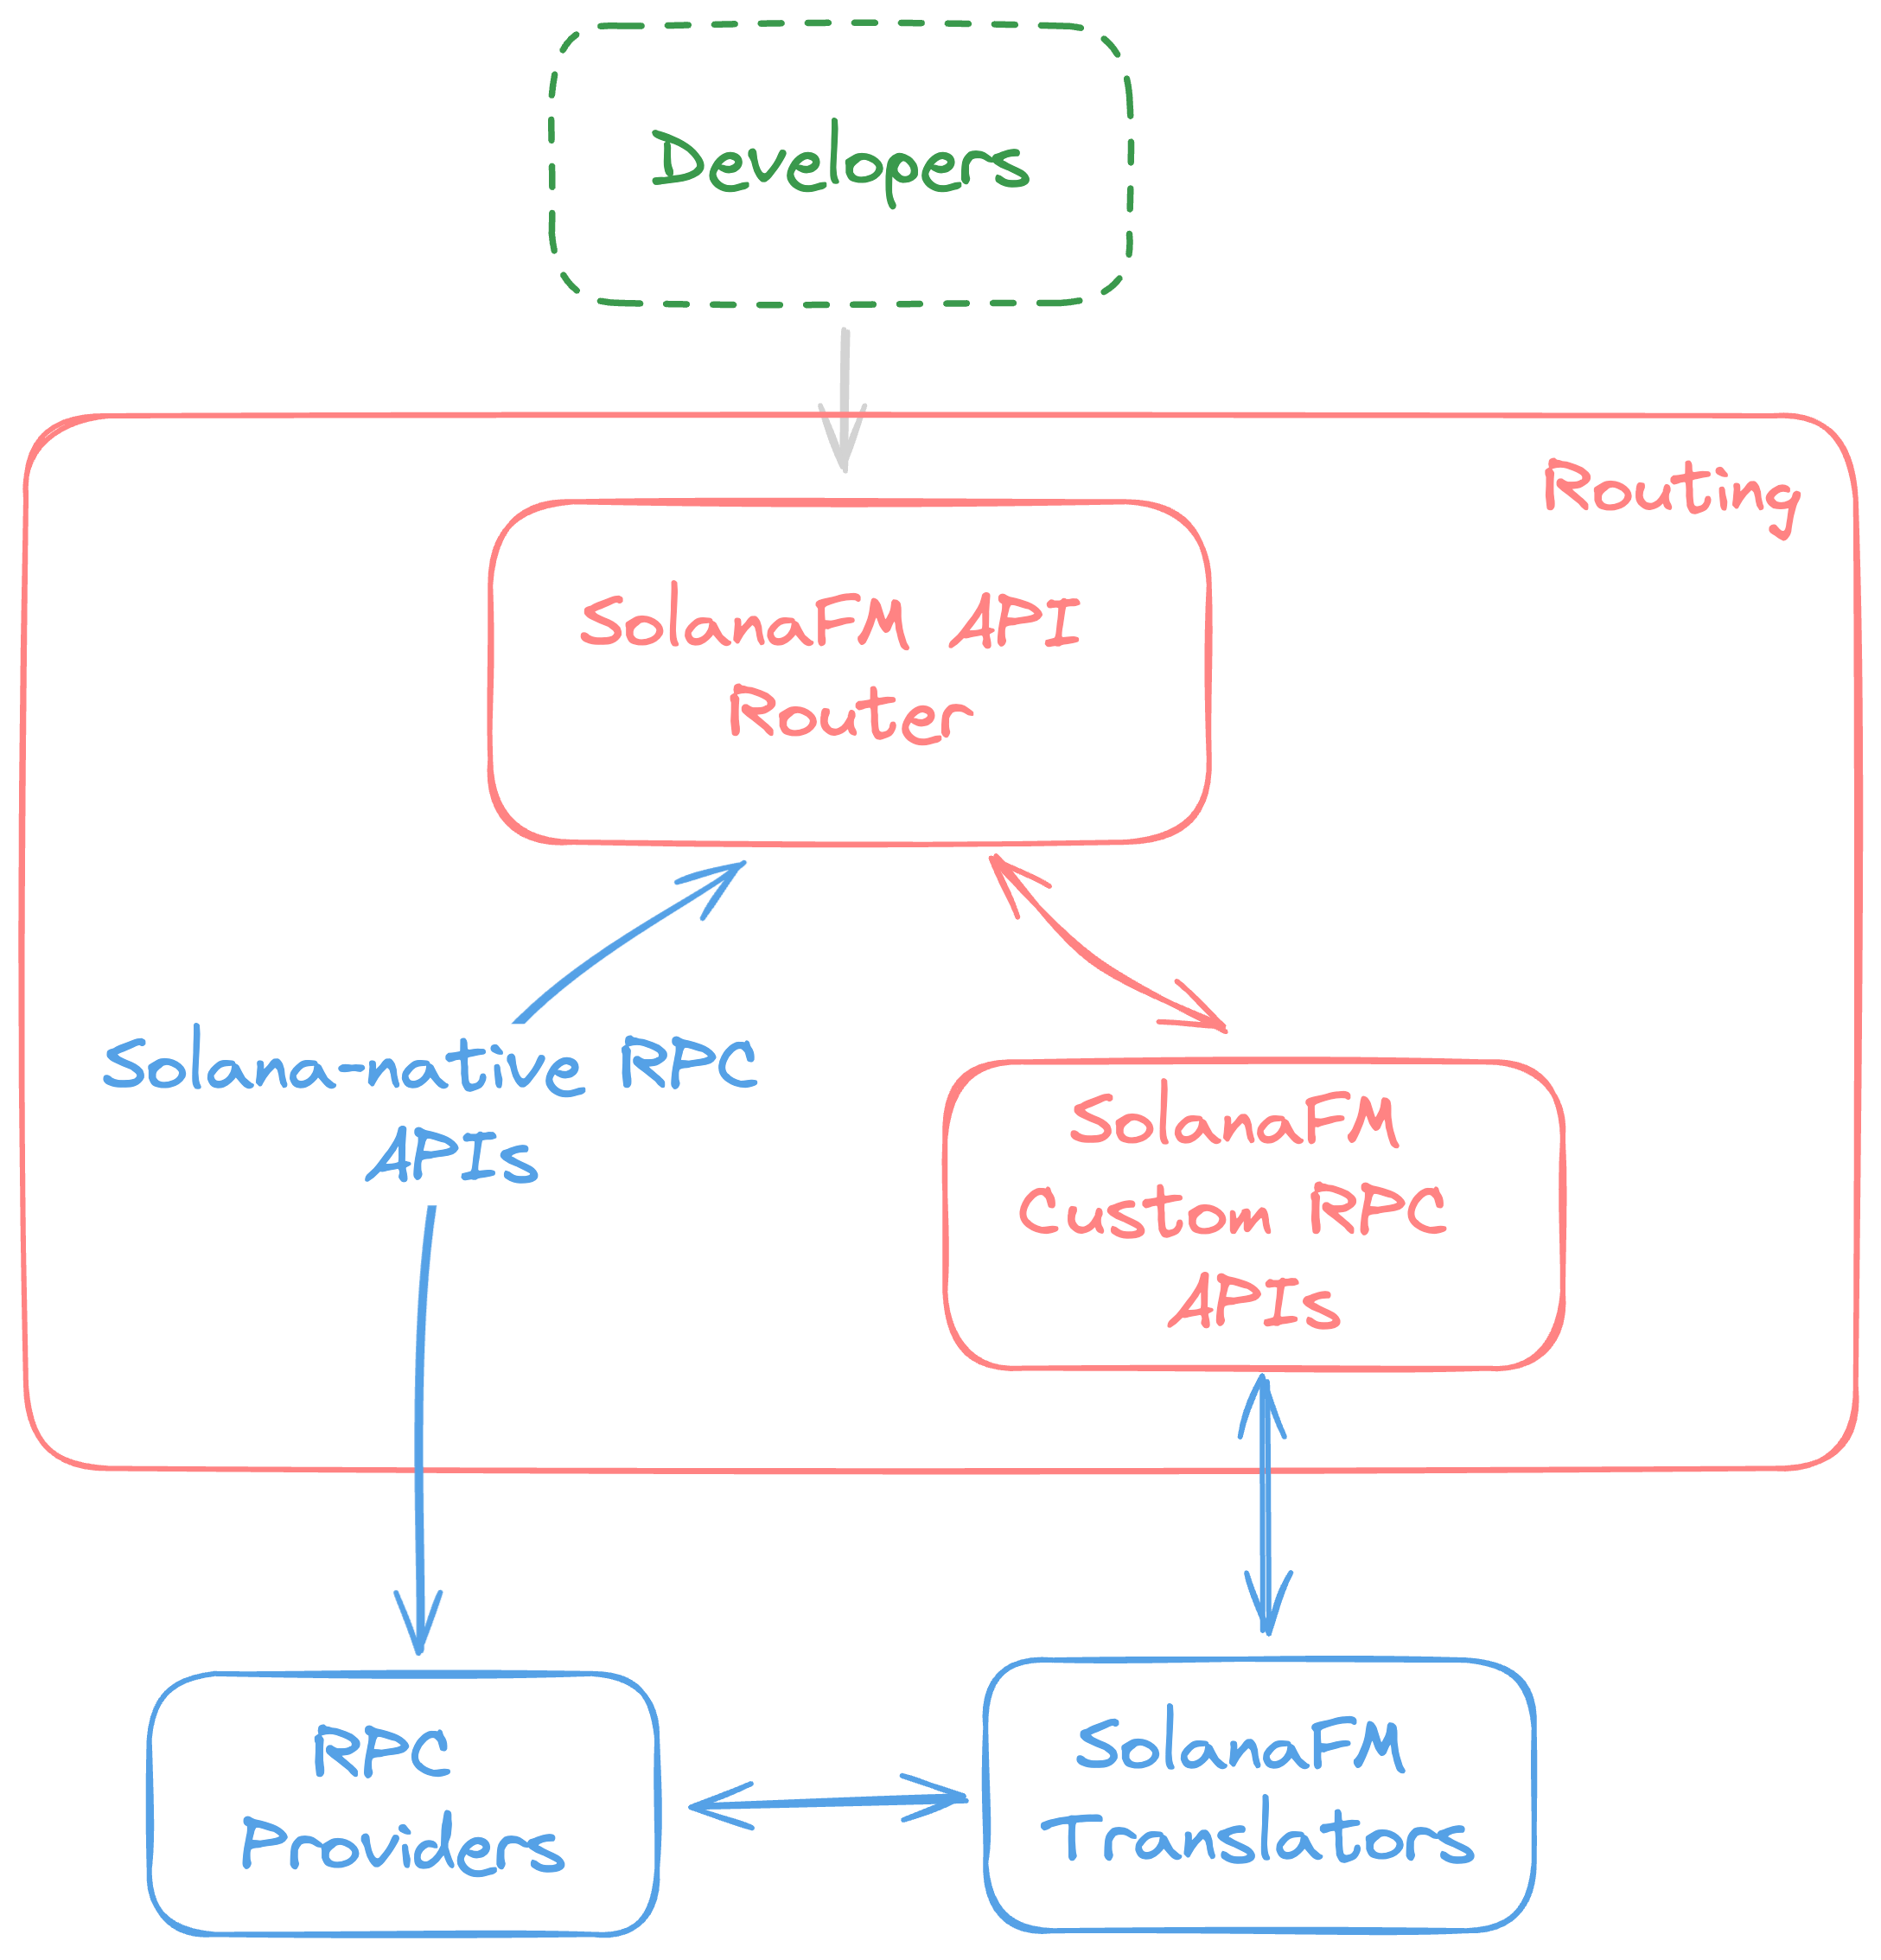 Lifecycle of an RPC request in SolanaFM's RPC infrastructure.